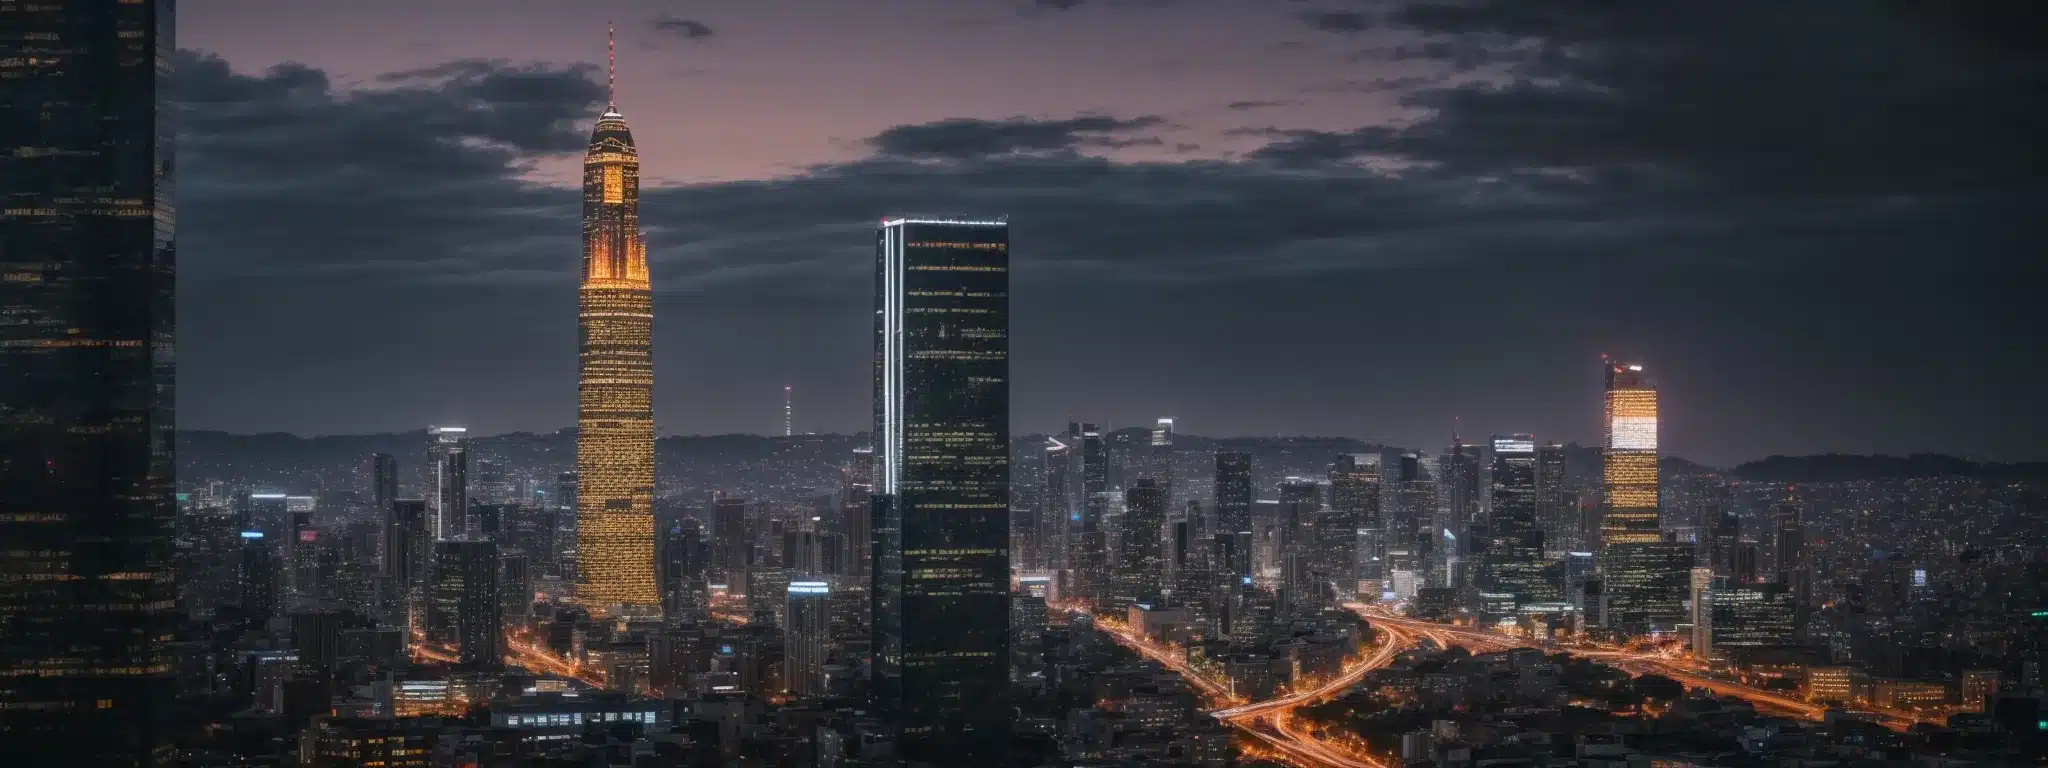 Two Corporate Giants Tower Over A Bustling Cityscape, Their Illuminated Billboards Facing Off Under The Twilight Sky.